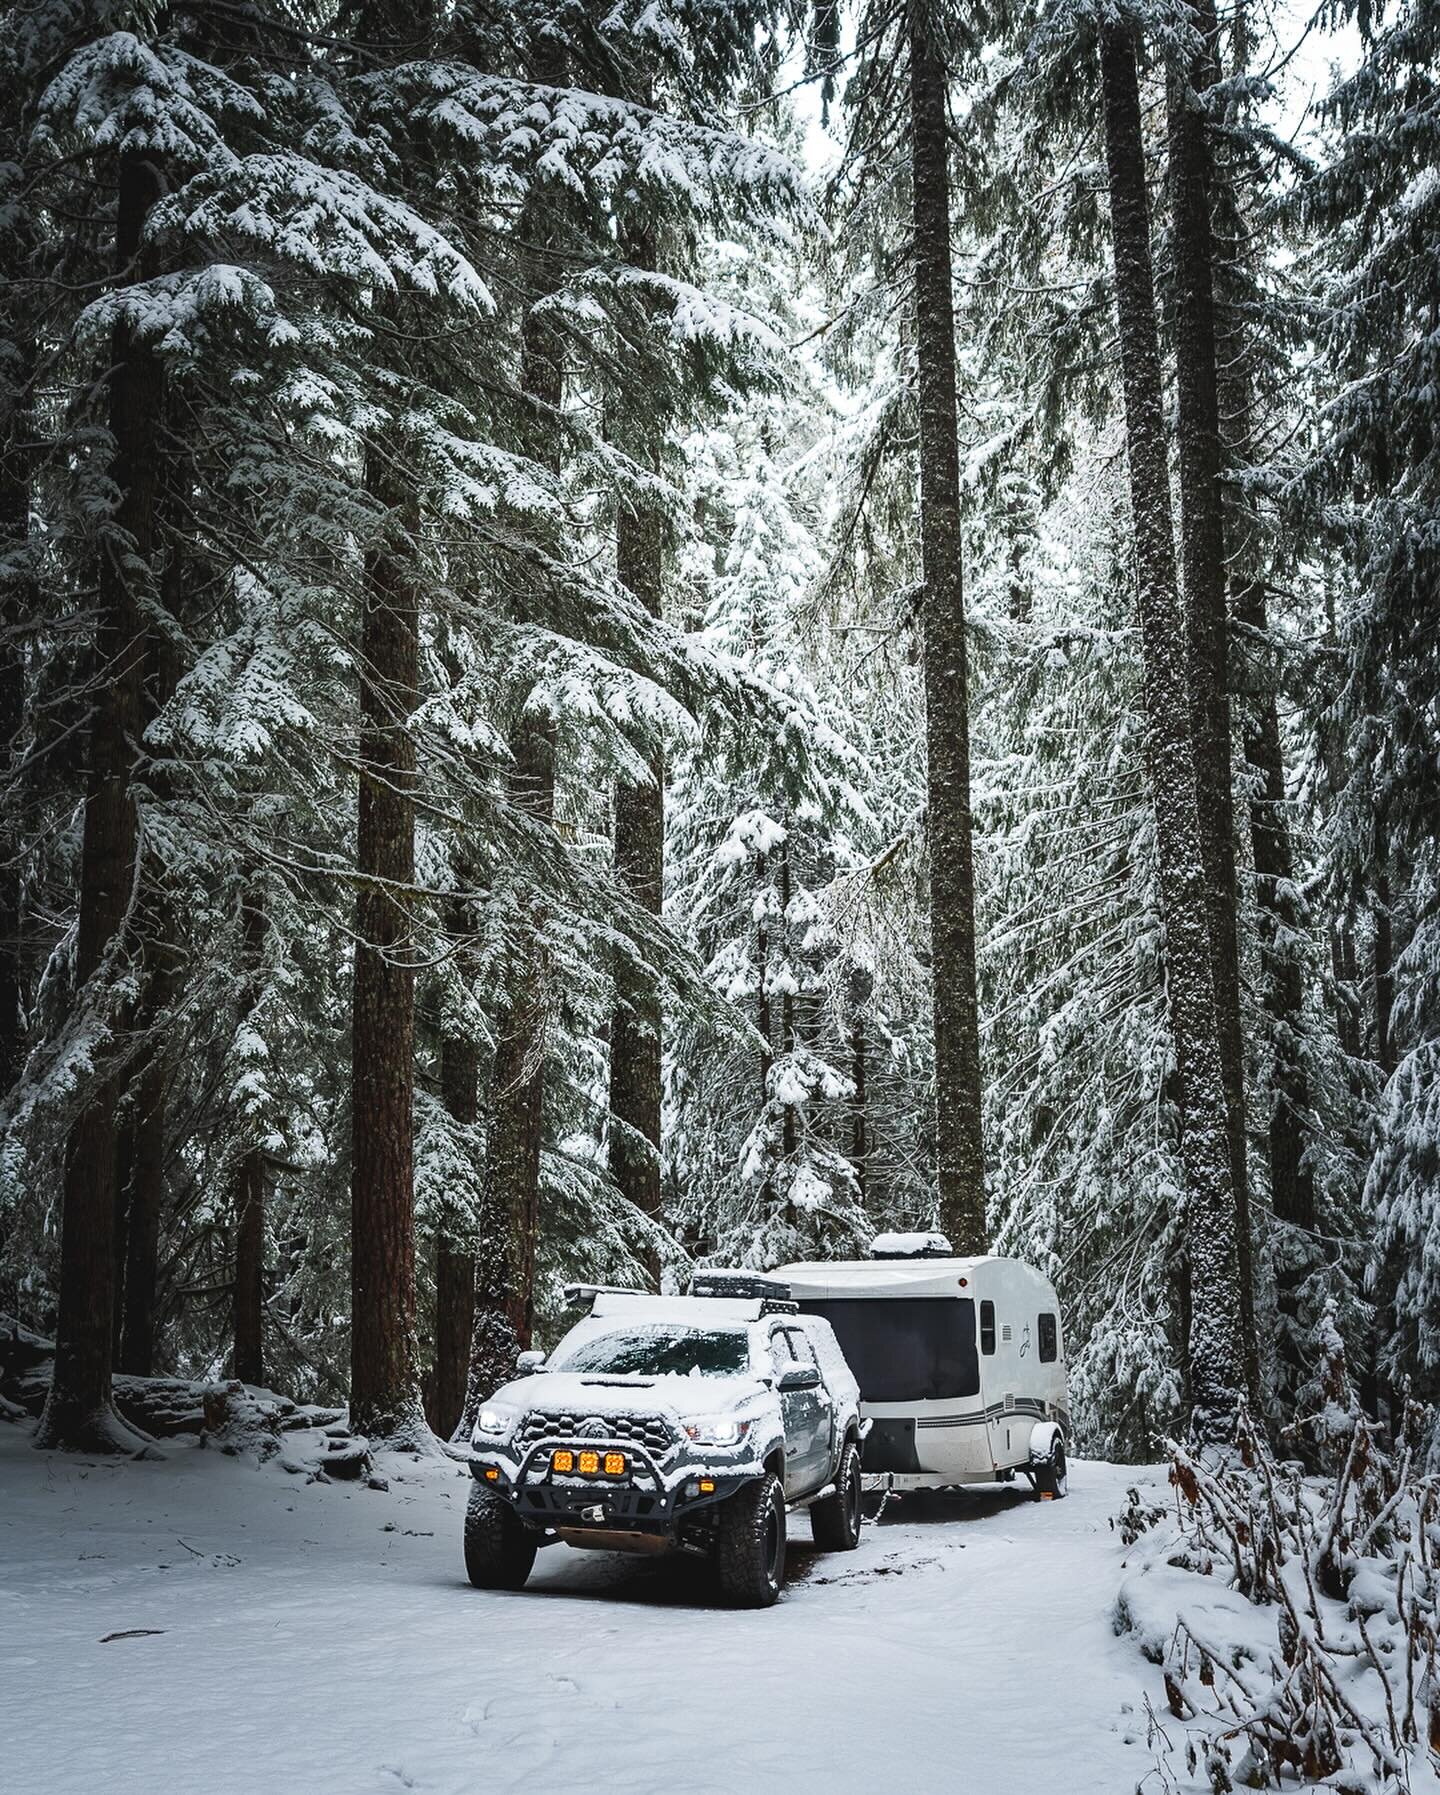 On this day one year ago, we parked Burt at the base of Mt. Rainier during the first snowfall of the winter. 

The scene was magical. We wheeled up to higher elevation and the snow got deeper and deeper. I miss the west coast.

#offroad #overland #sn